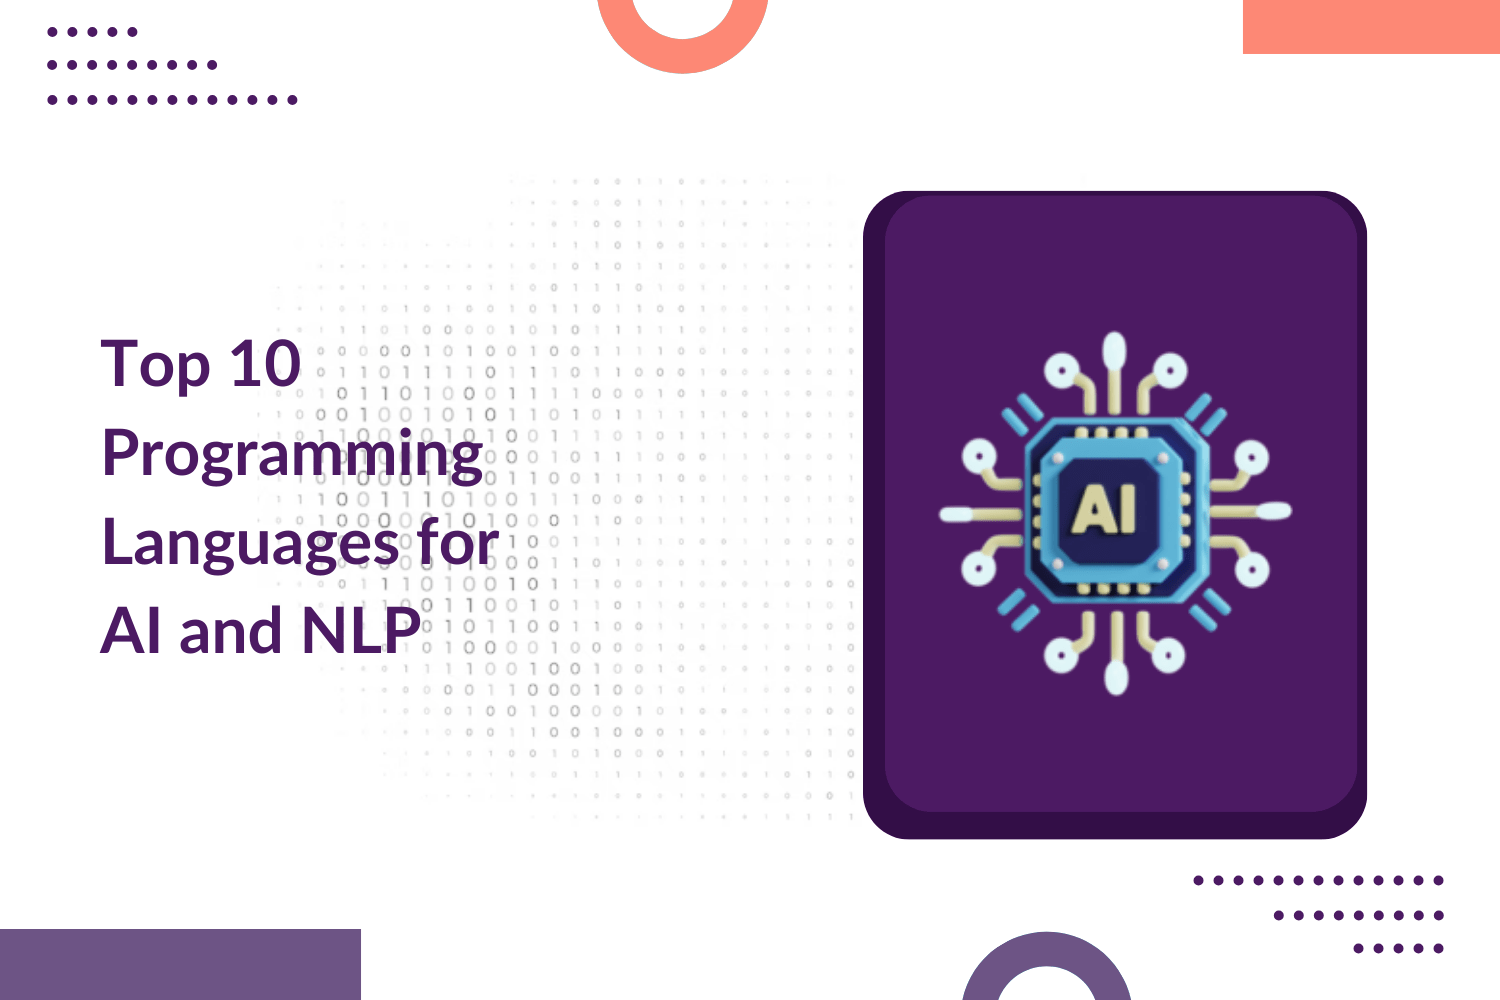 Top 10 Programming Languages for AI and NLP